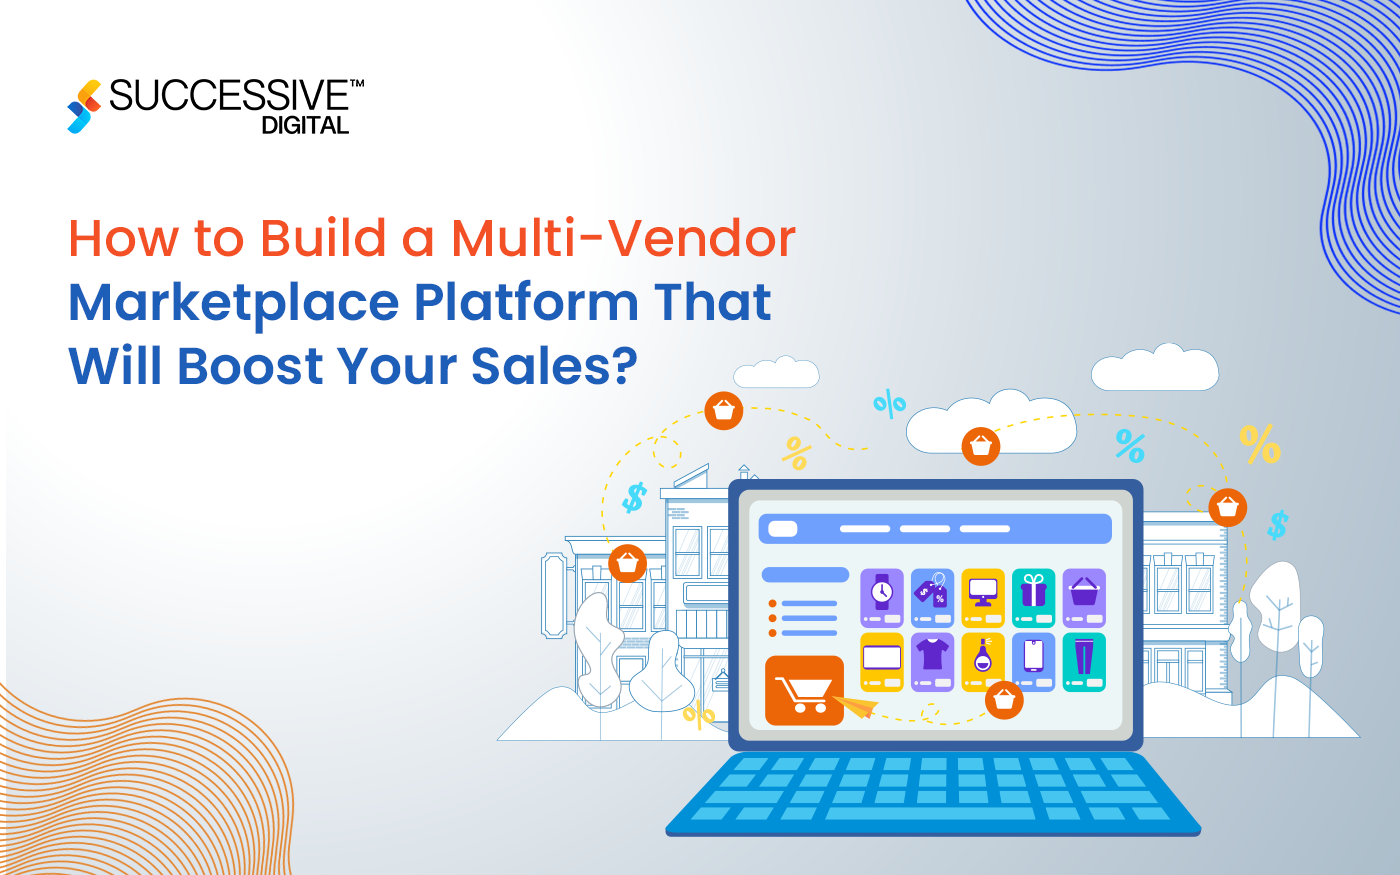 How to Build a Multi-Vendor Marketplace Platform That Will Boost Your Sales?